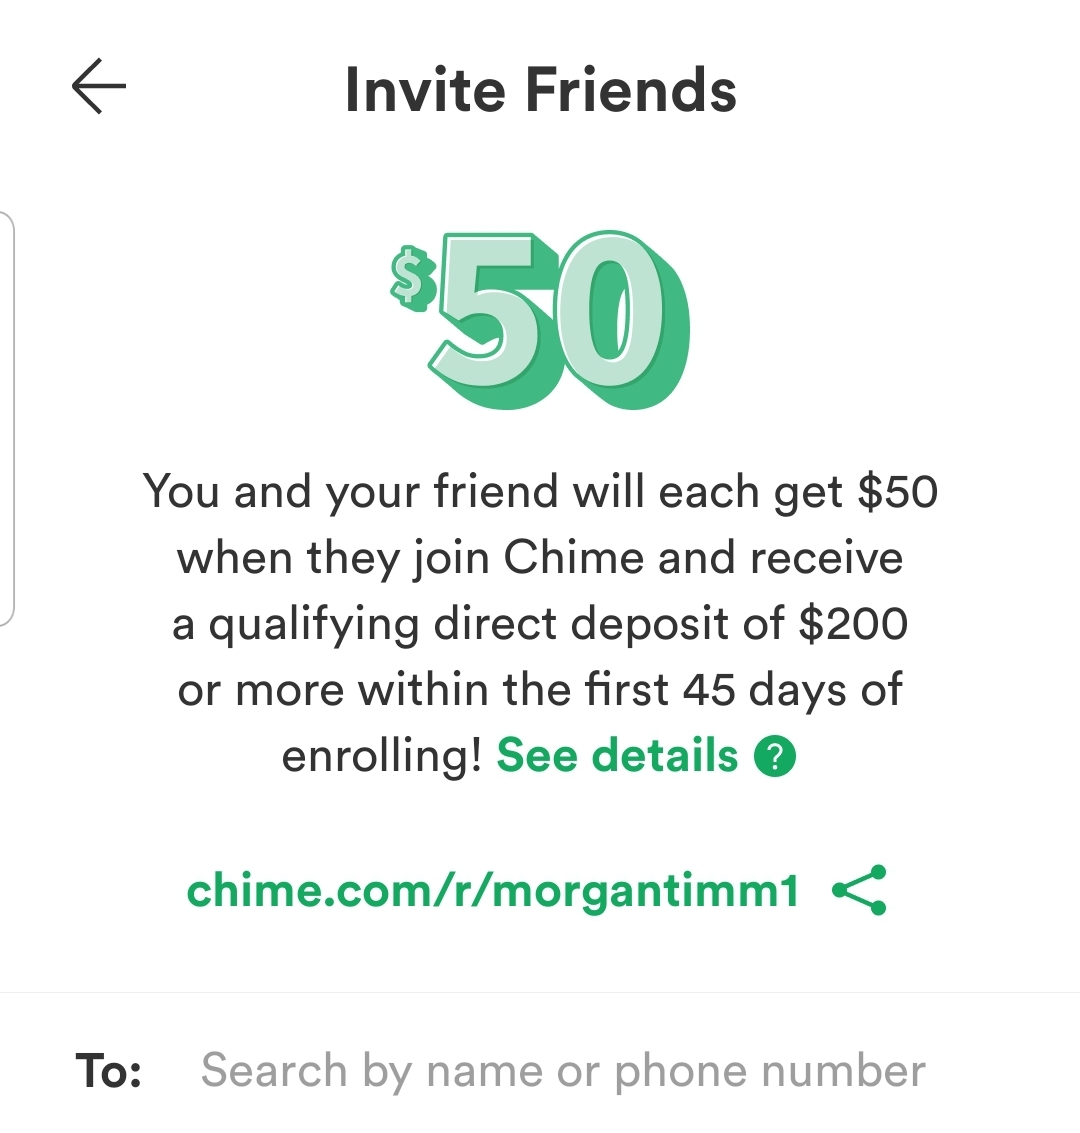 A screenshot sharing that Chime members can earn $50 for referring new members.